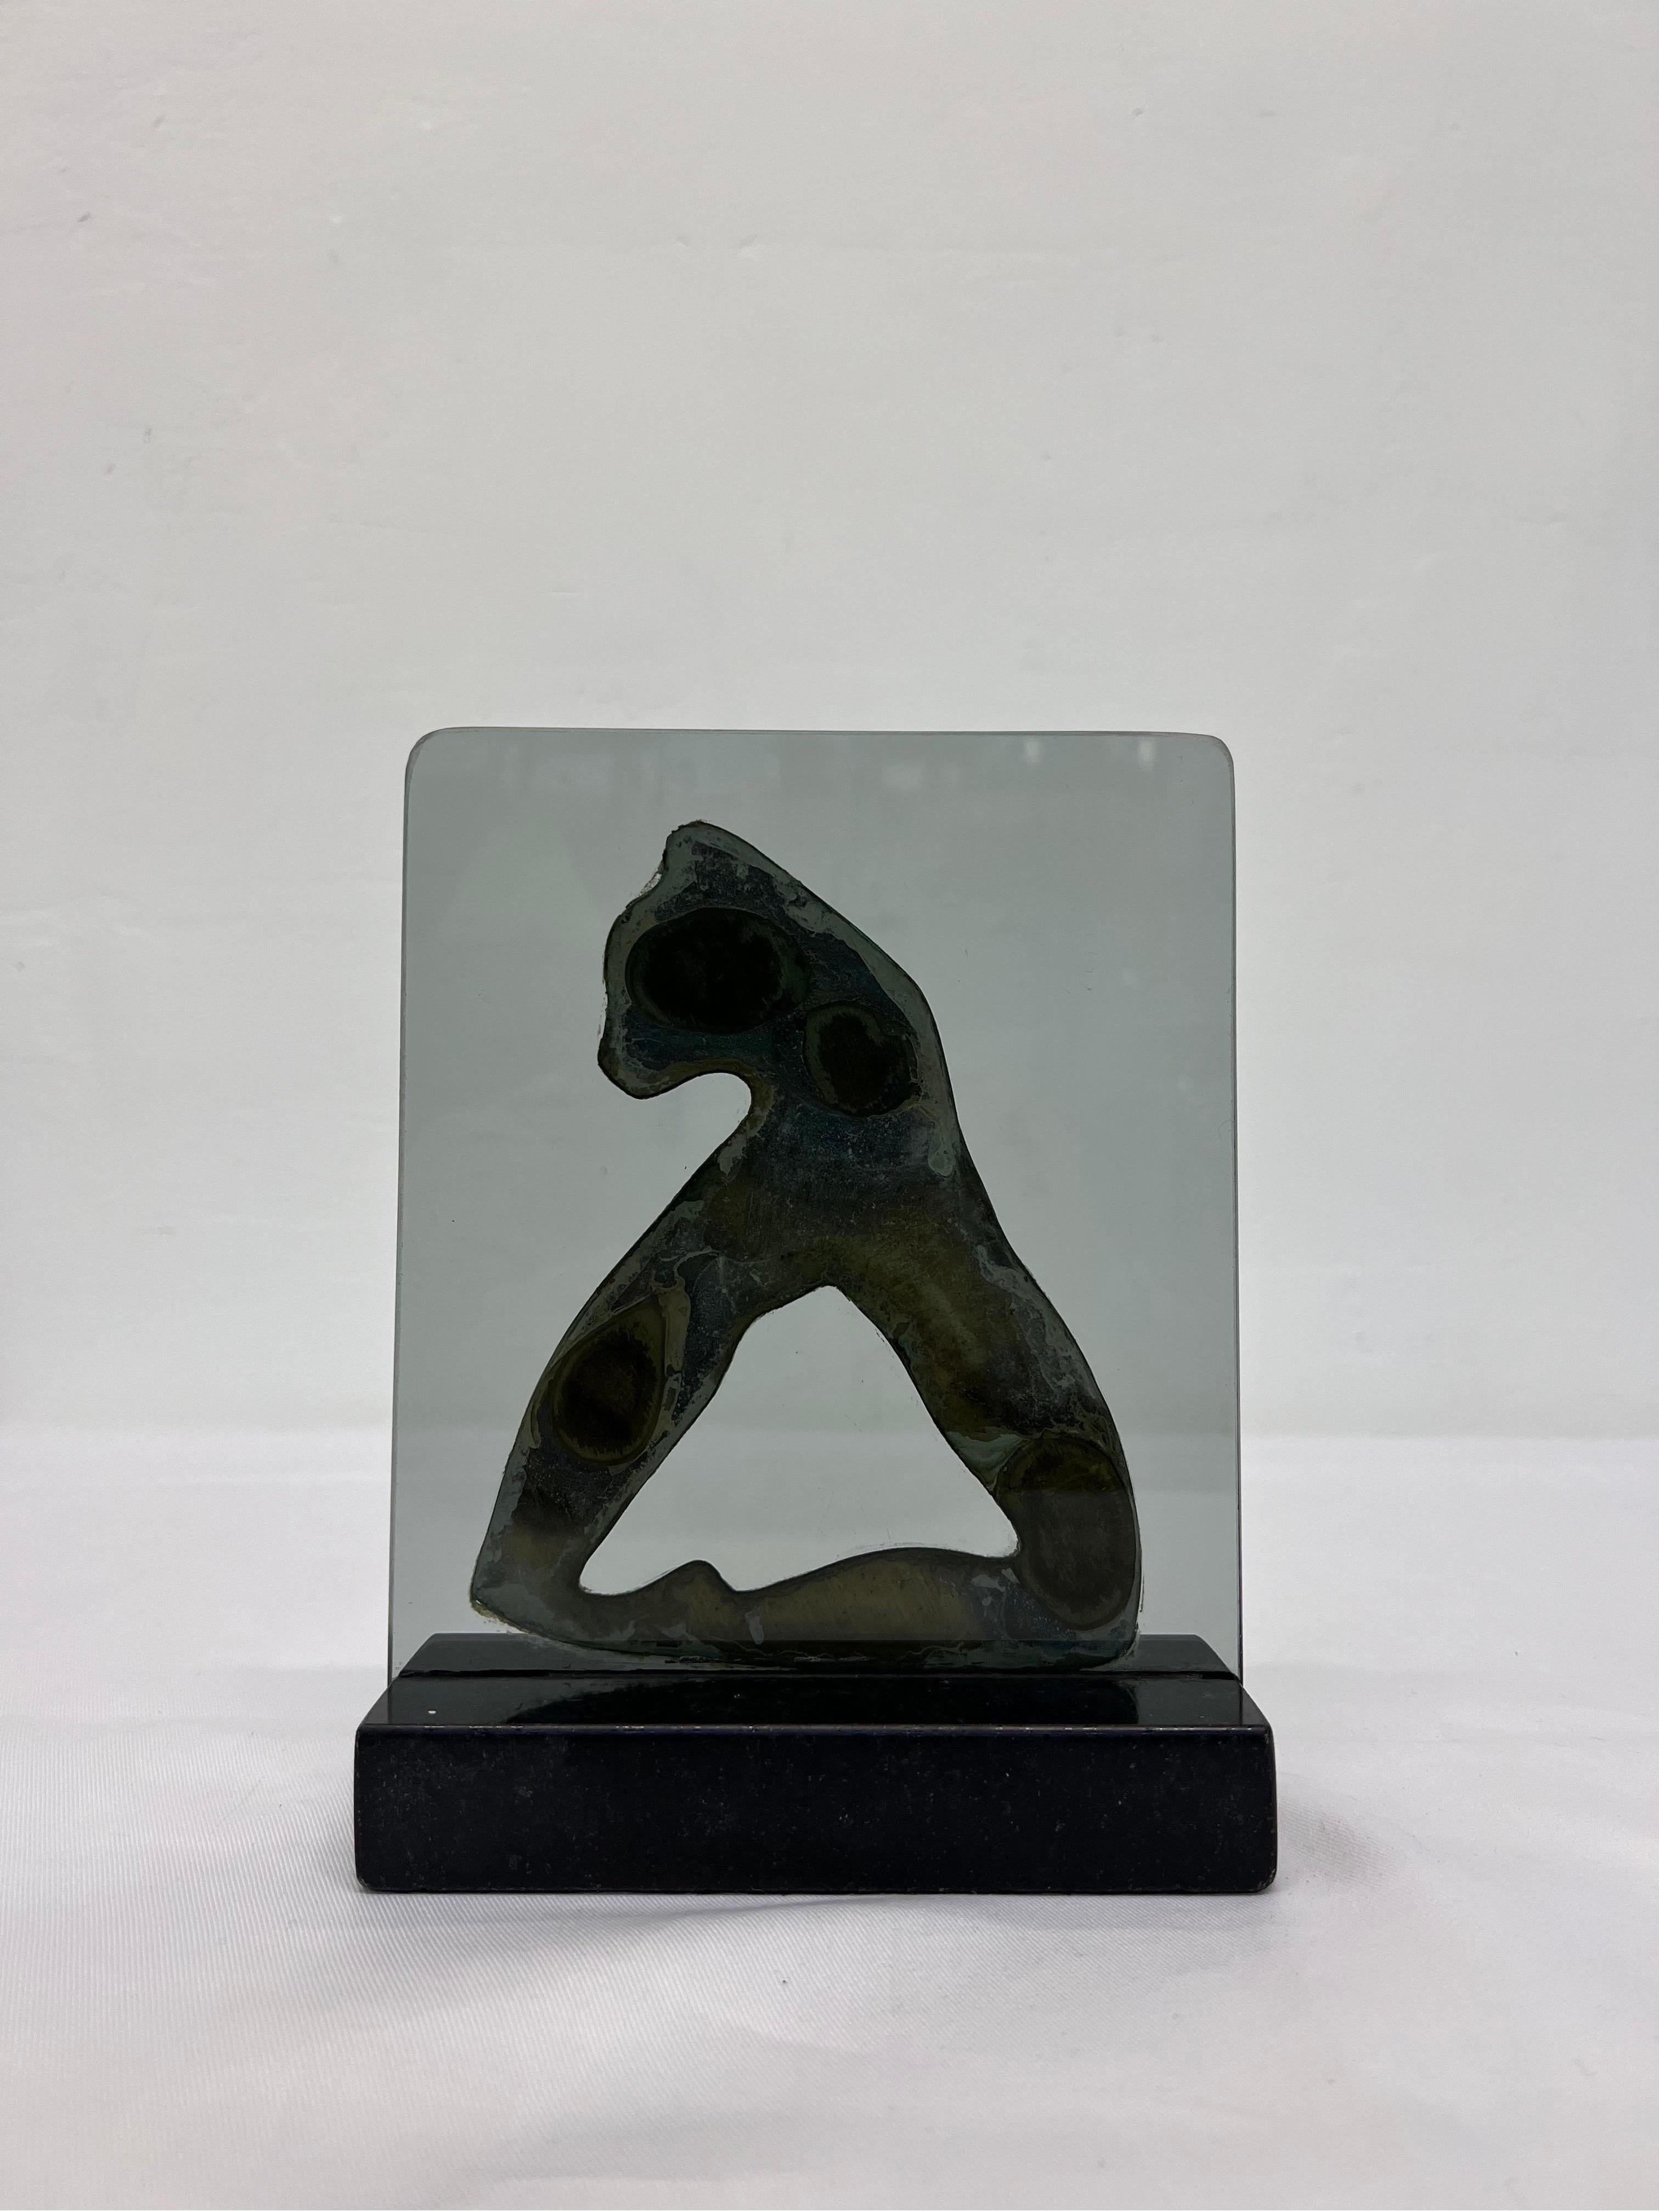 Brazilian Mid-Century Modern Bronze Sculpture on Glass and Granite Base, 1960s For Sale 1